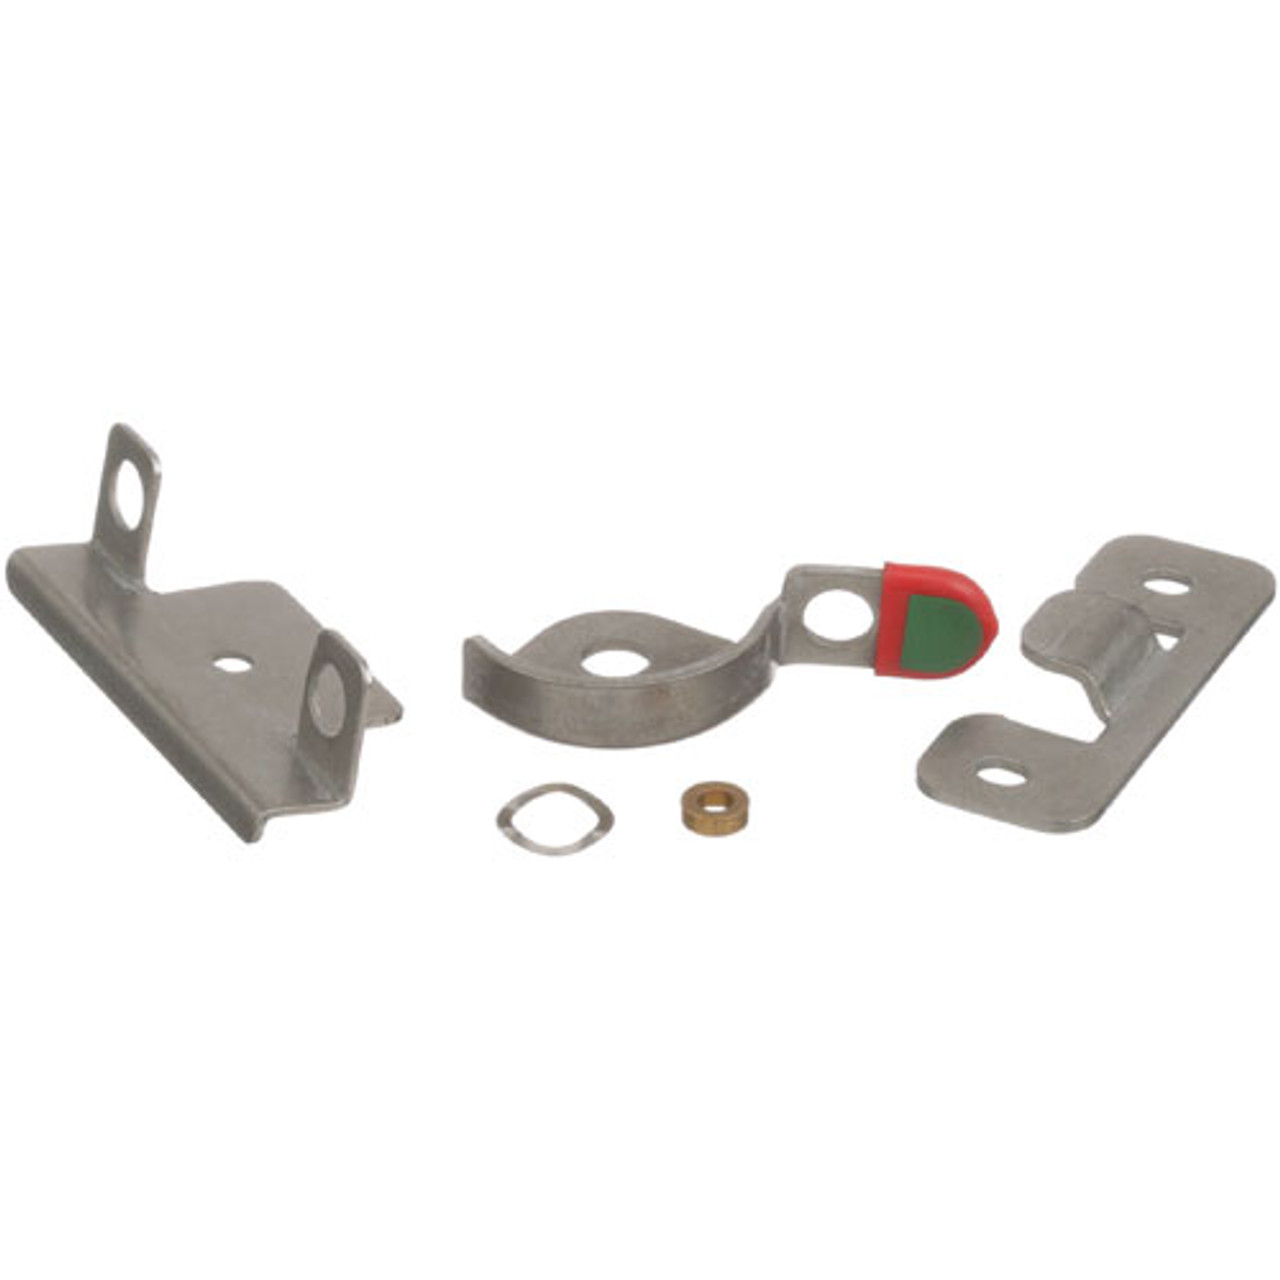 Cres Cor 1246031K - Hasp Lock Assembly